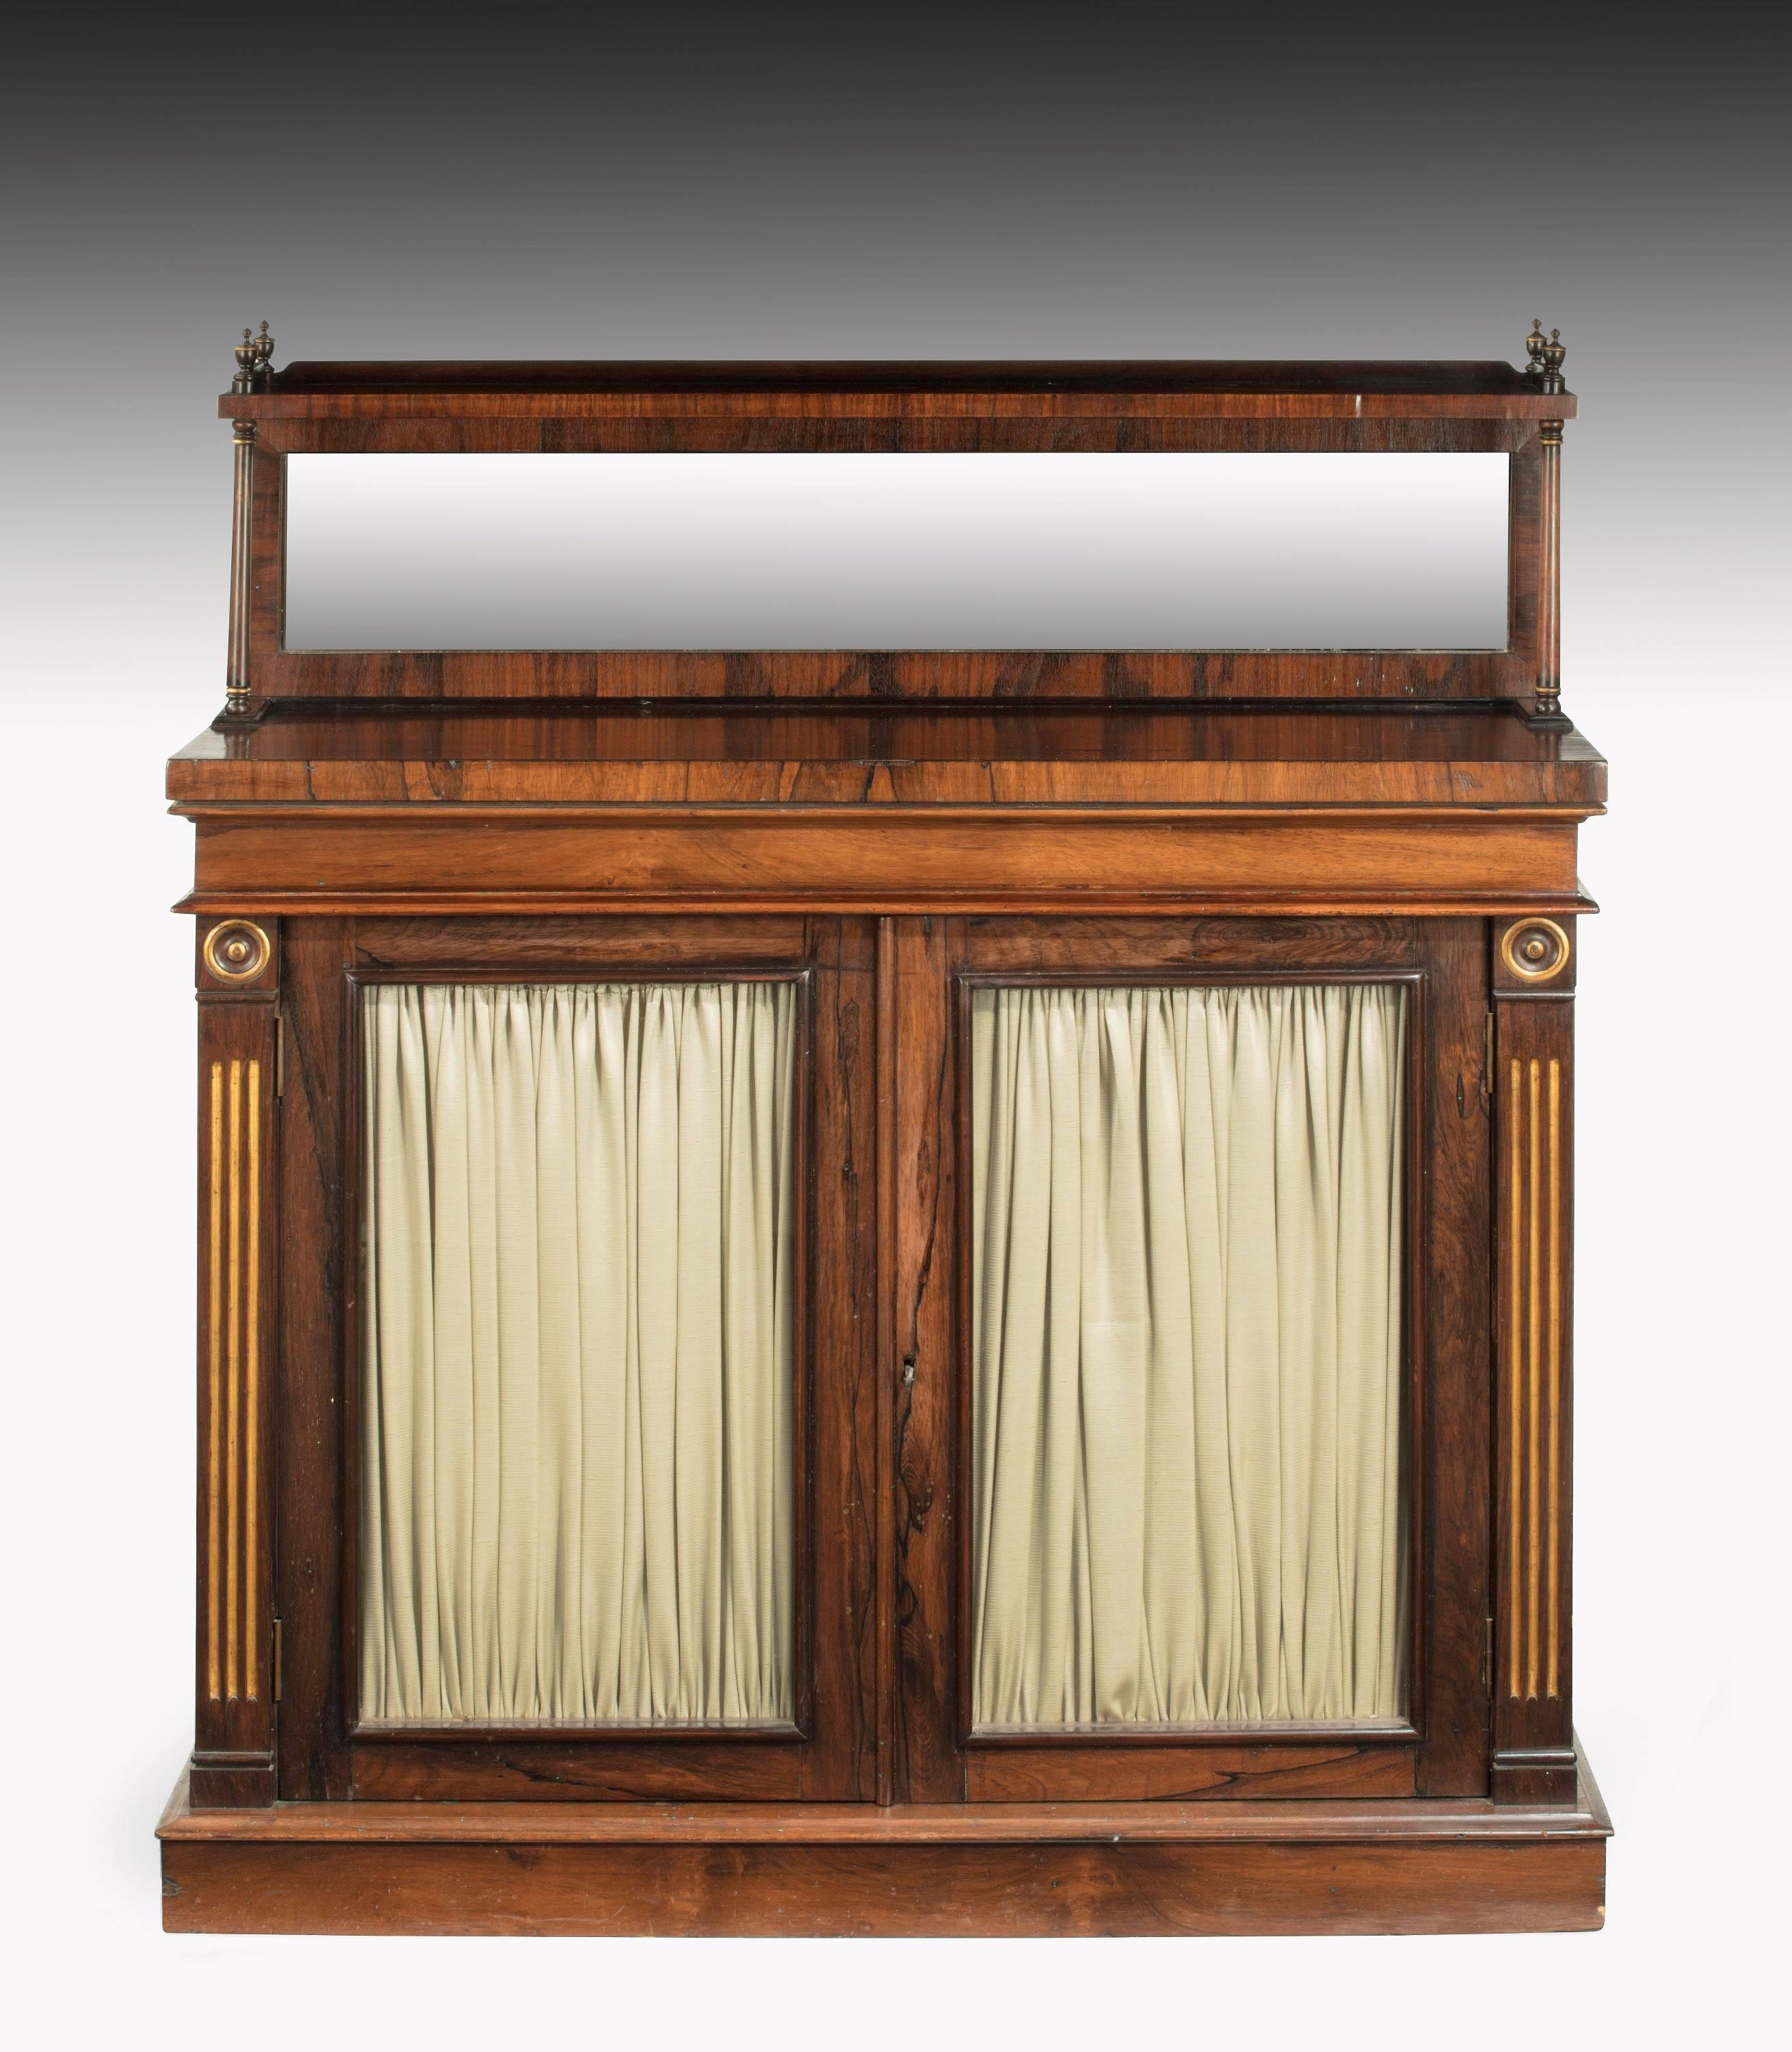 A Regency period mahogany, chiffonier the top section with a mirror. Crossbanded edge. Finely carved uprights to the left and right hand side. Plain glass base drawers.